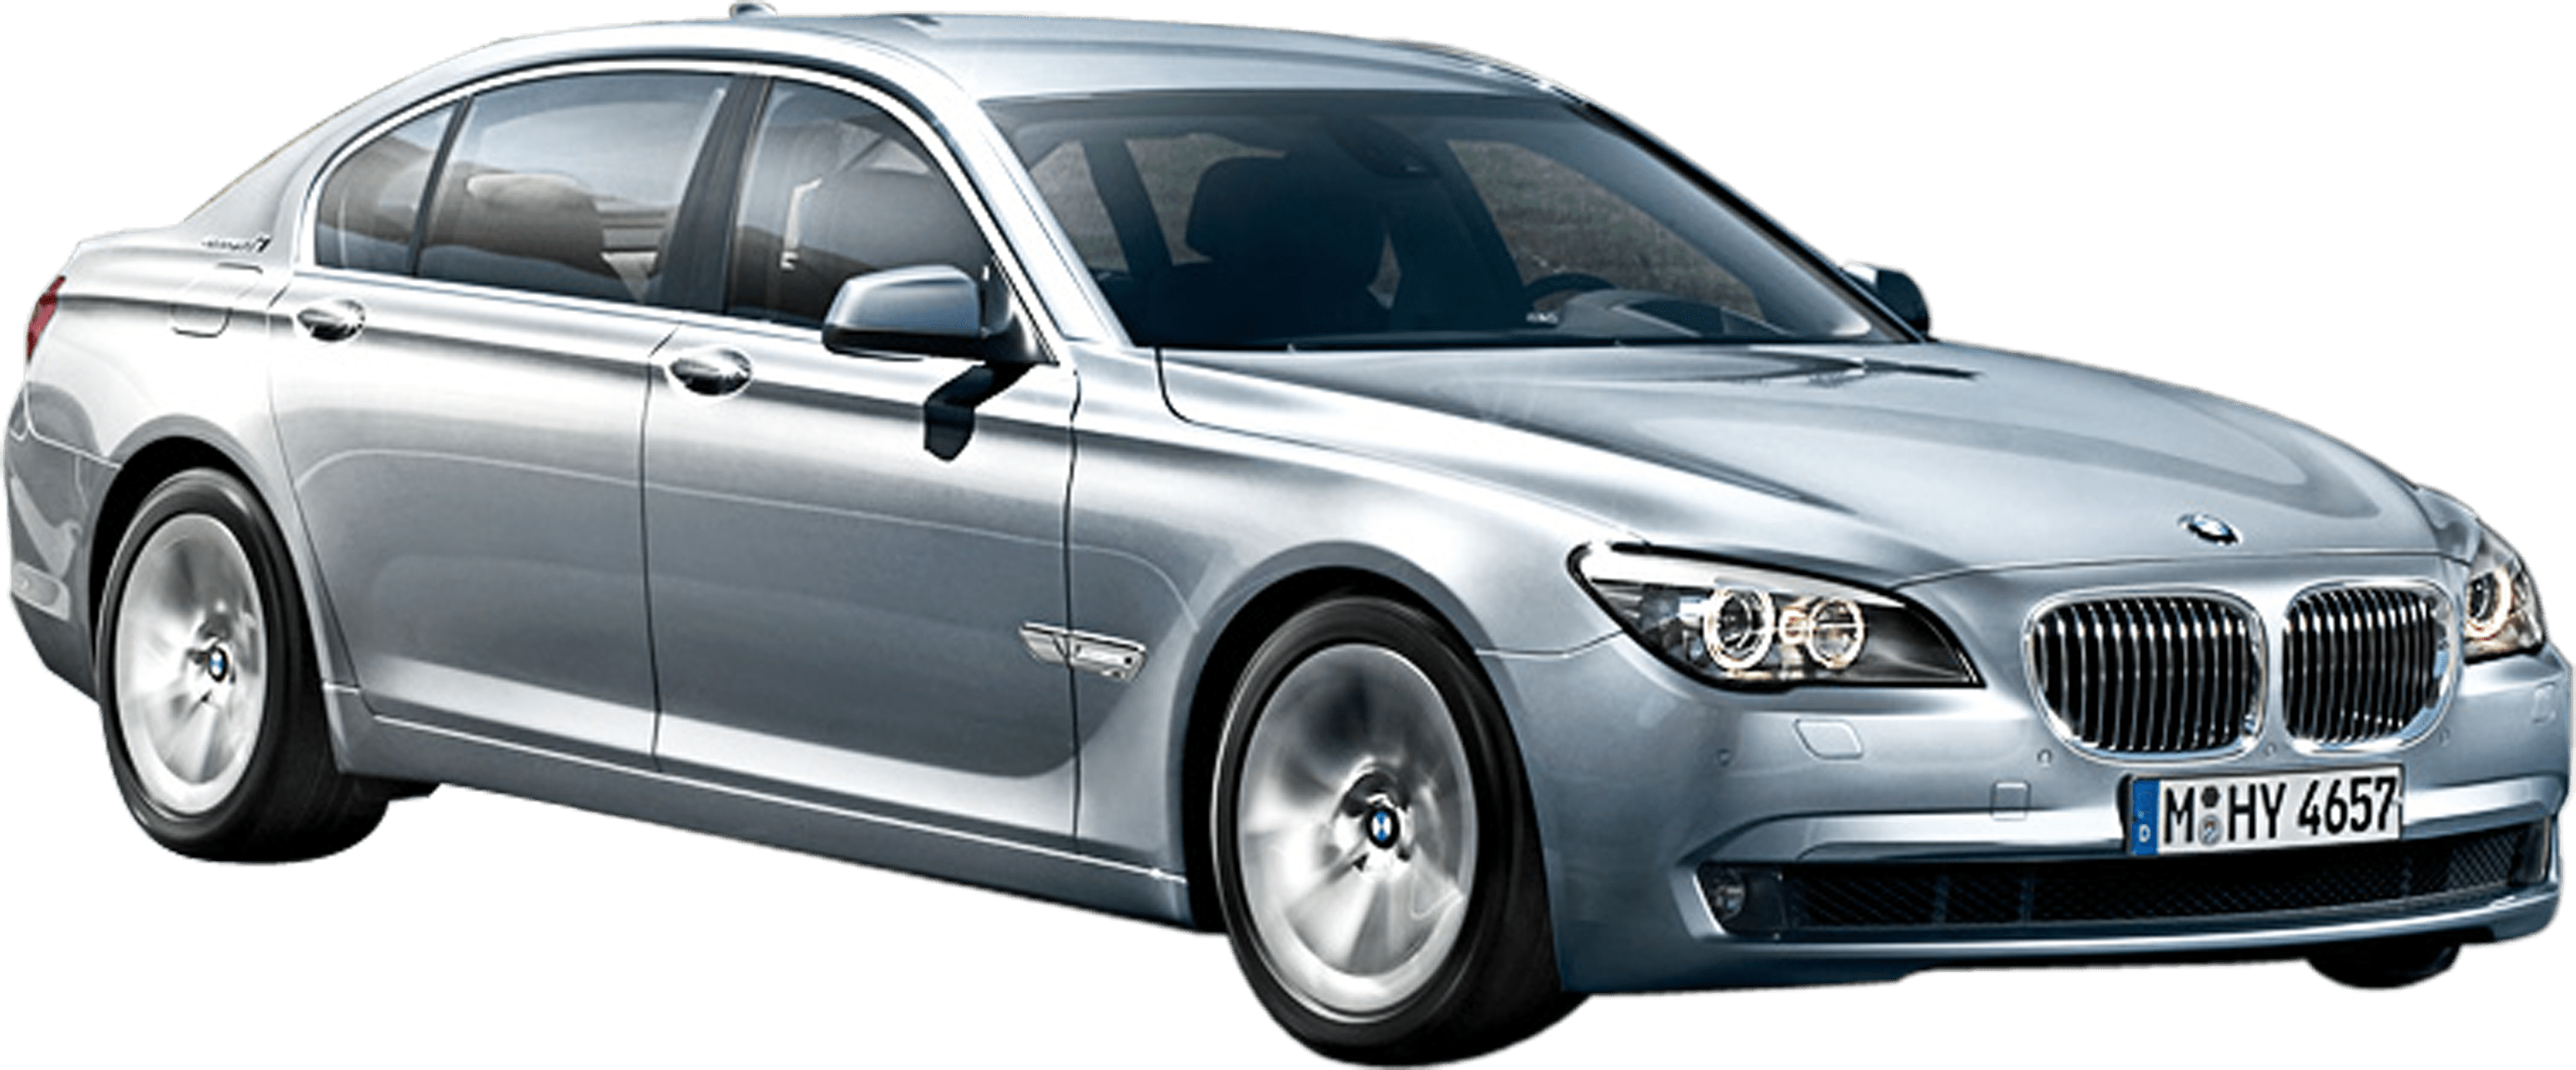 BMW 7 Series PNG Pic Background